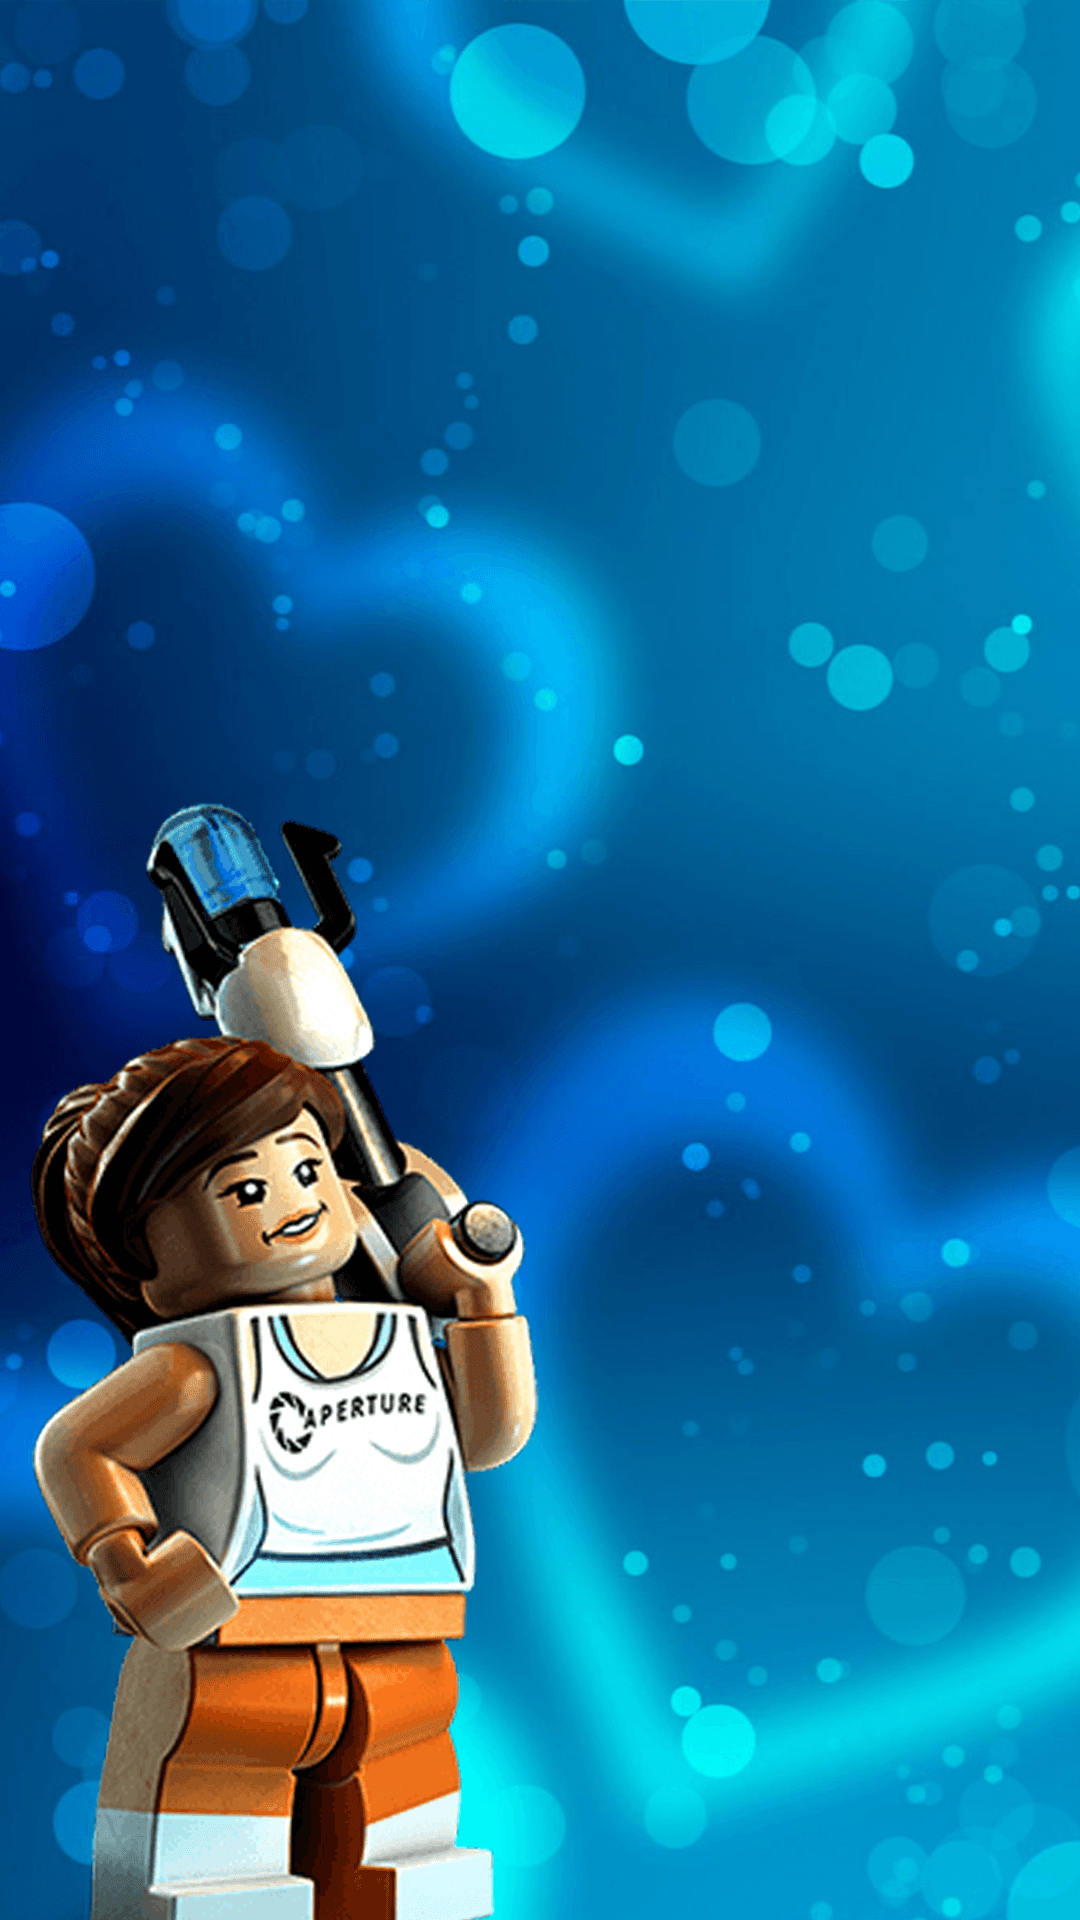 Chell Valentine Wallpaper Lego Dimensions To Life